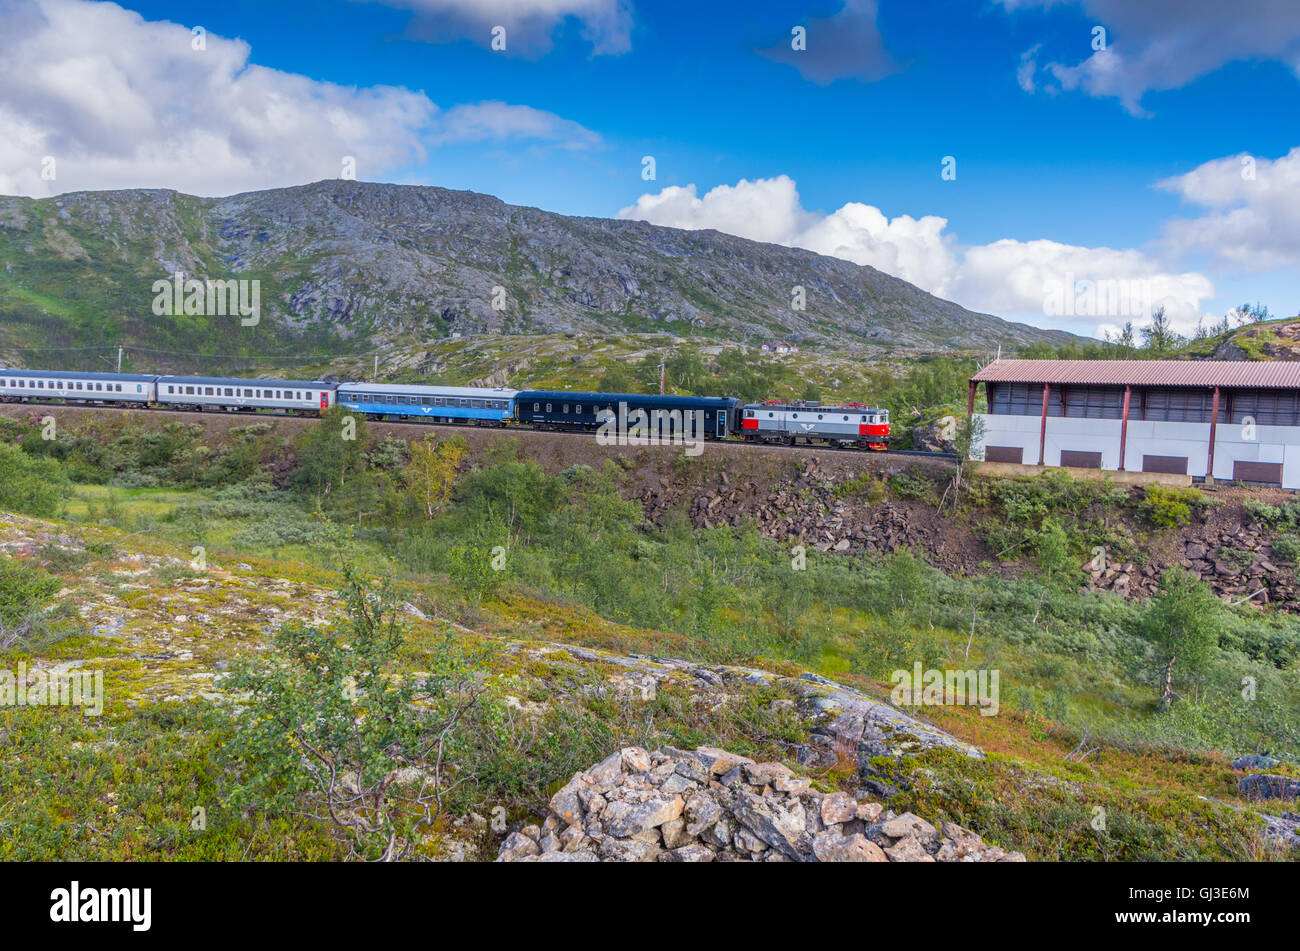 Silver and red locomotive train pulling carriages towards Bjornfell Station and Norway Swedish border Stock Photo